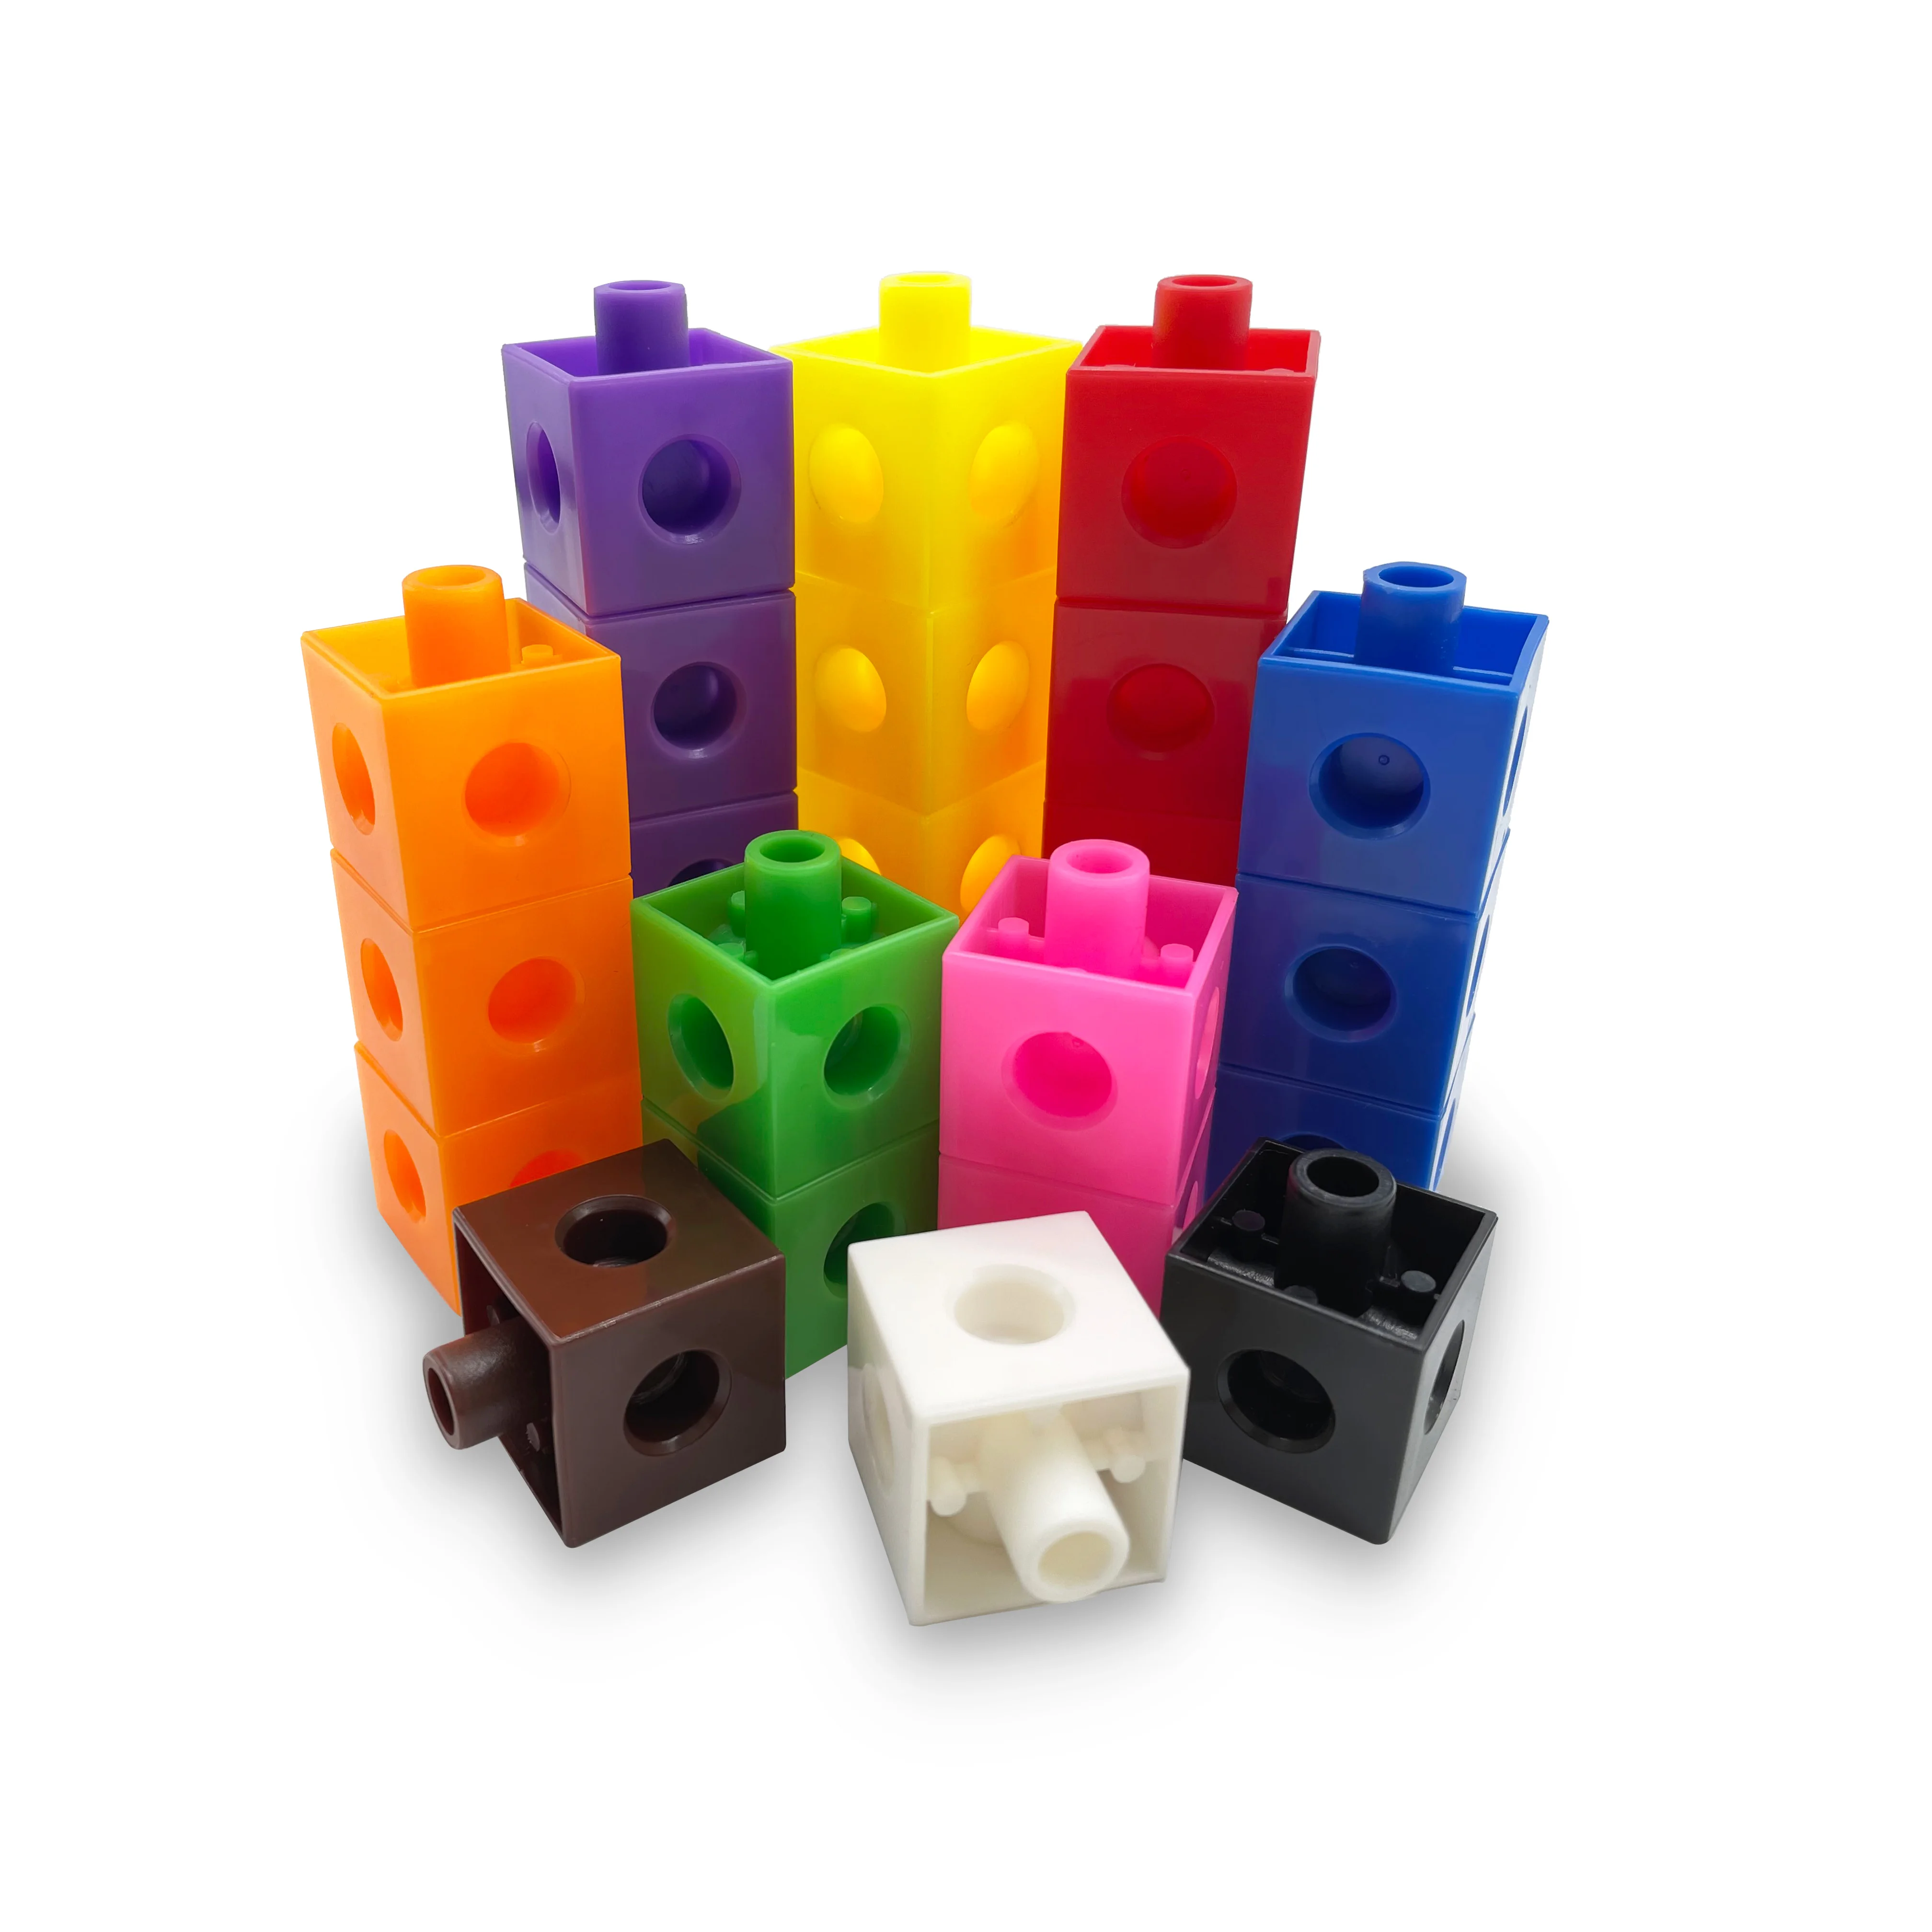 

Cheap Snap Cubes Educational Counting Toy Set of 500 Cubes, Ages 5+